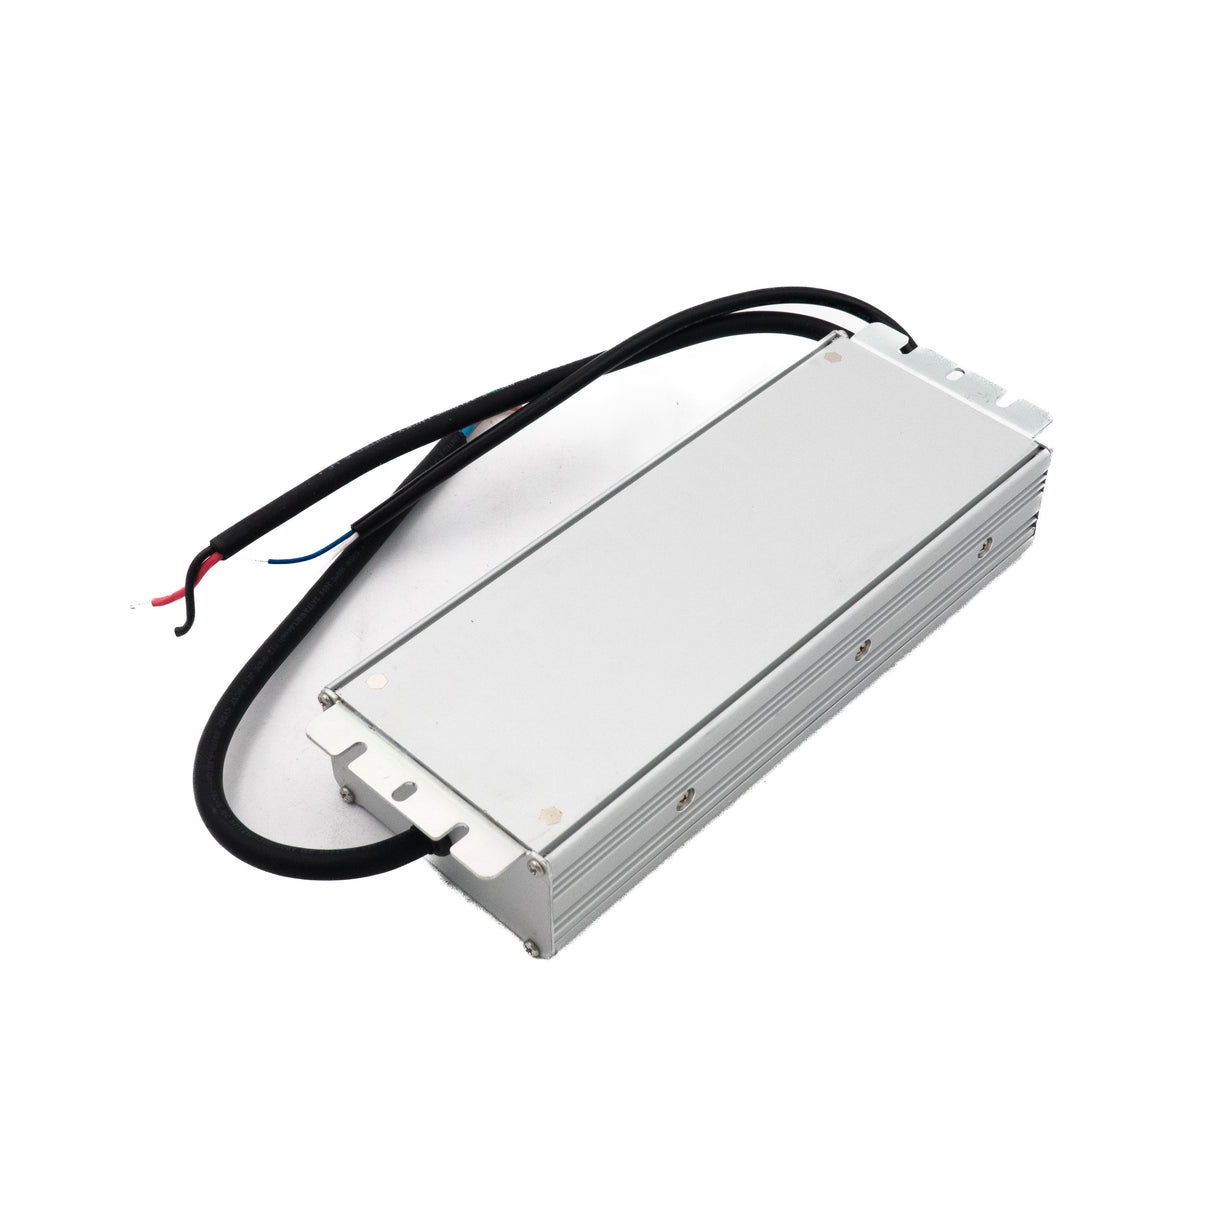 Mean Well HLG-320H-54B Power Supply 320W 54V- Dimmable - PHOTO 2